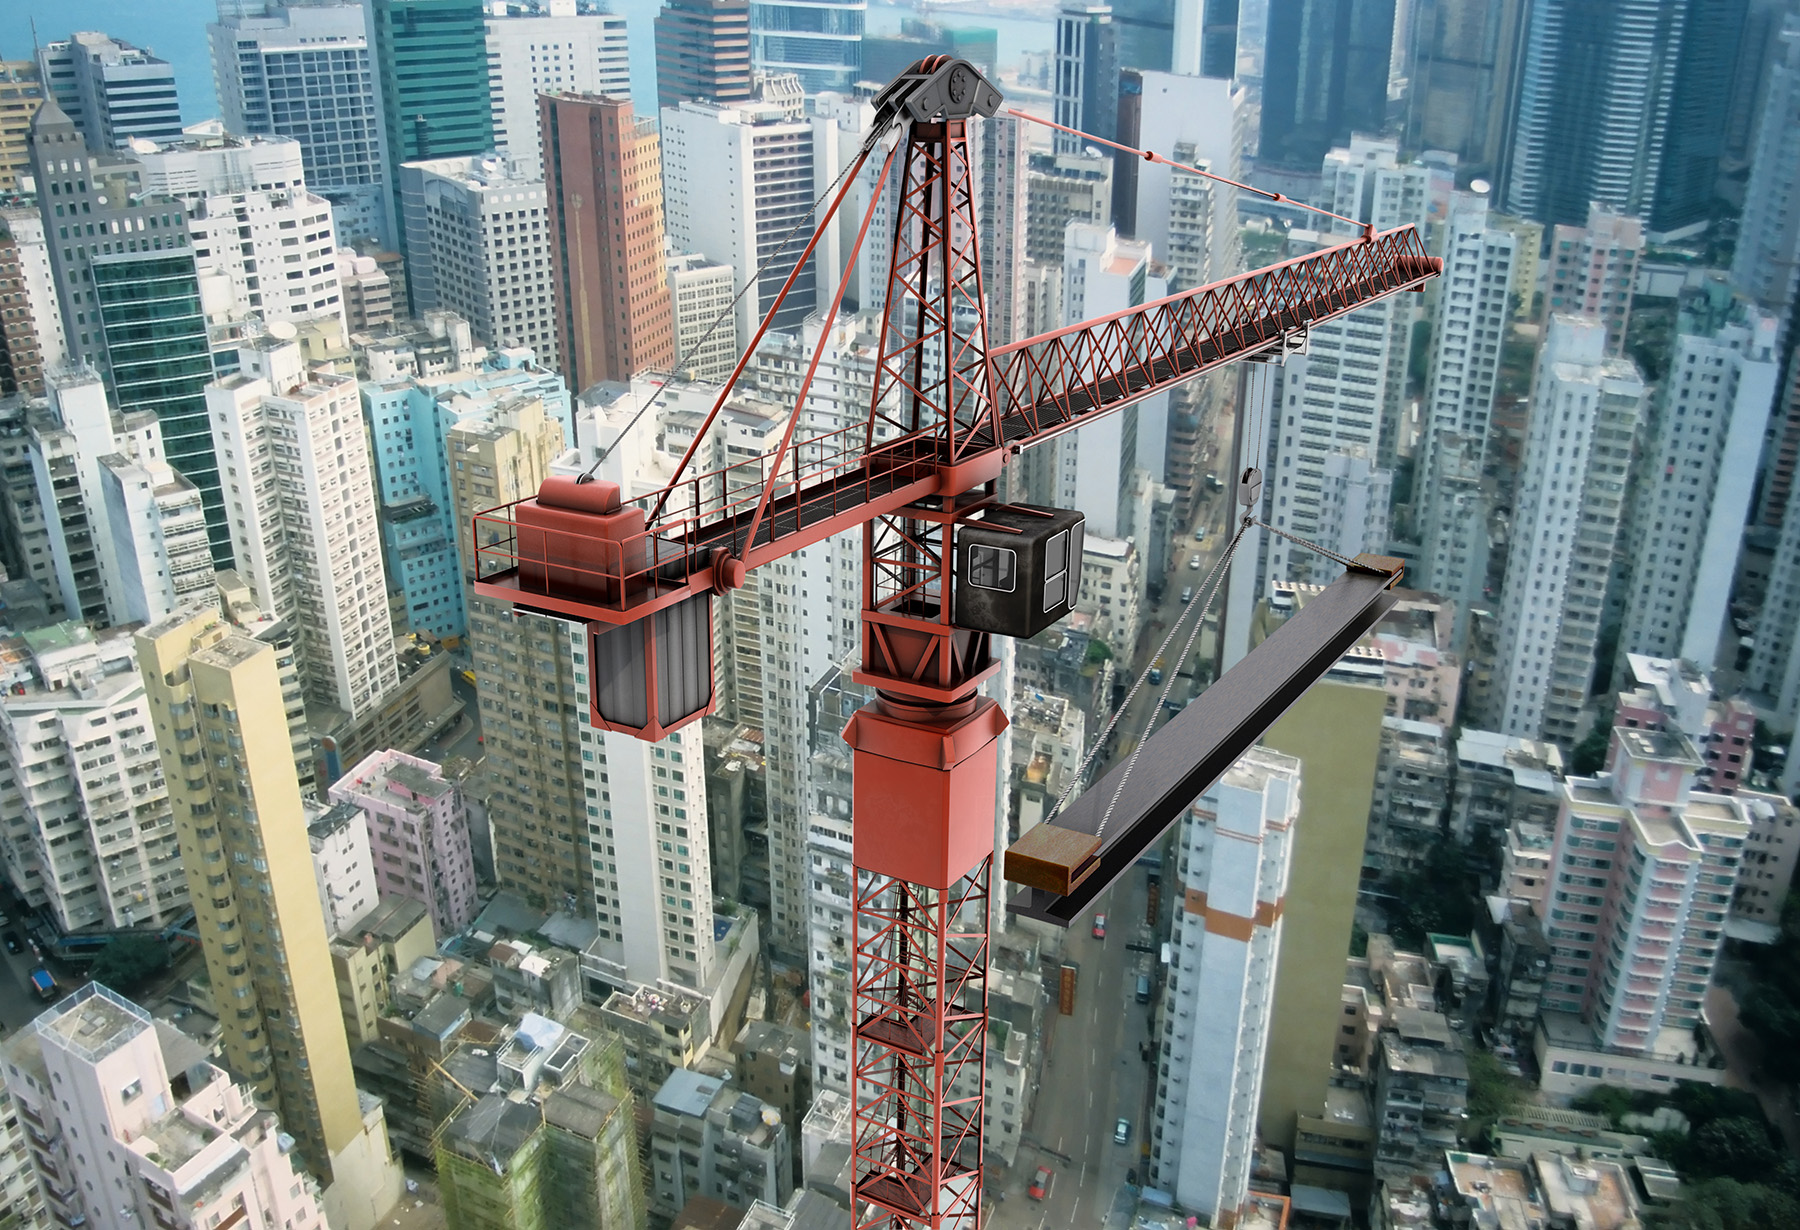 Cityscape with many high-rise buildings. A red crane arm is lifting a steel beam into place